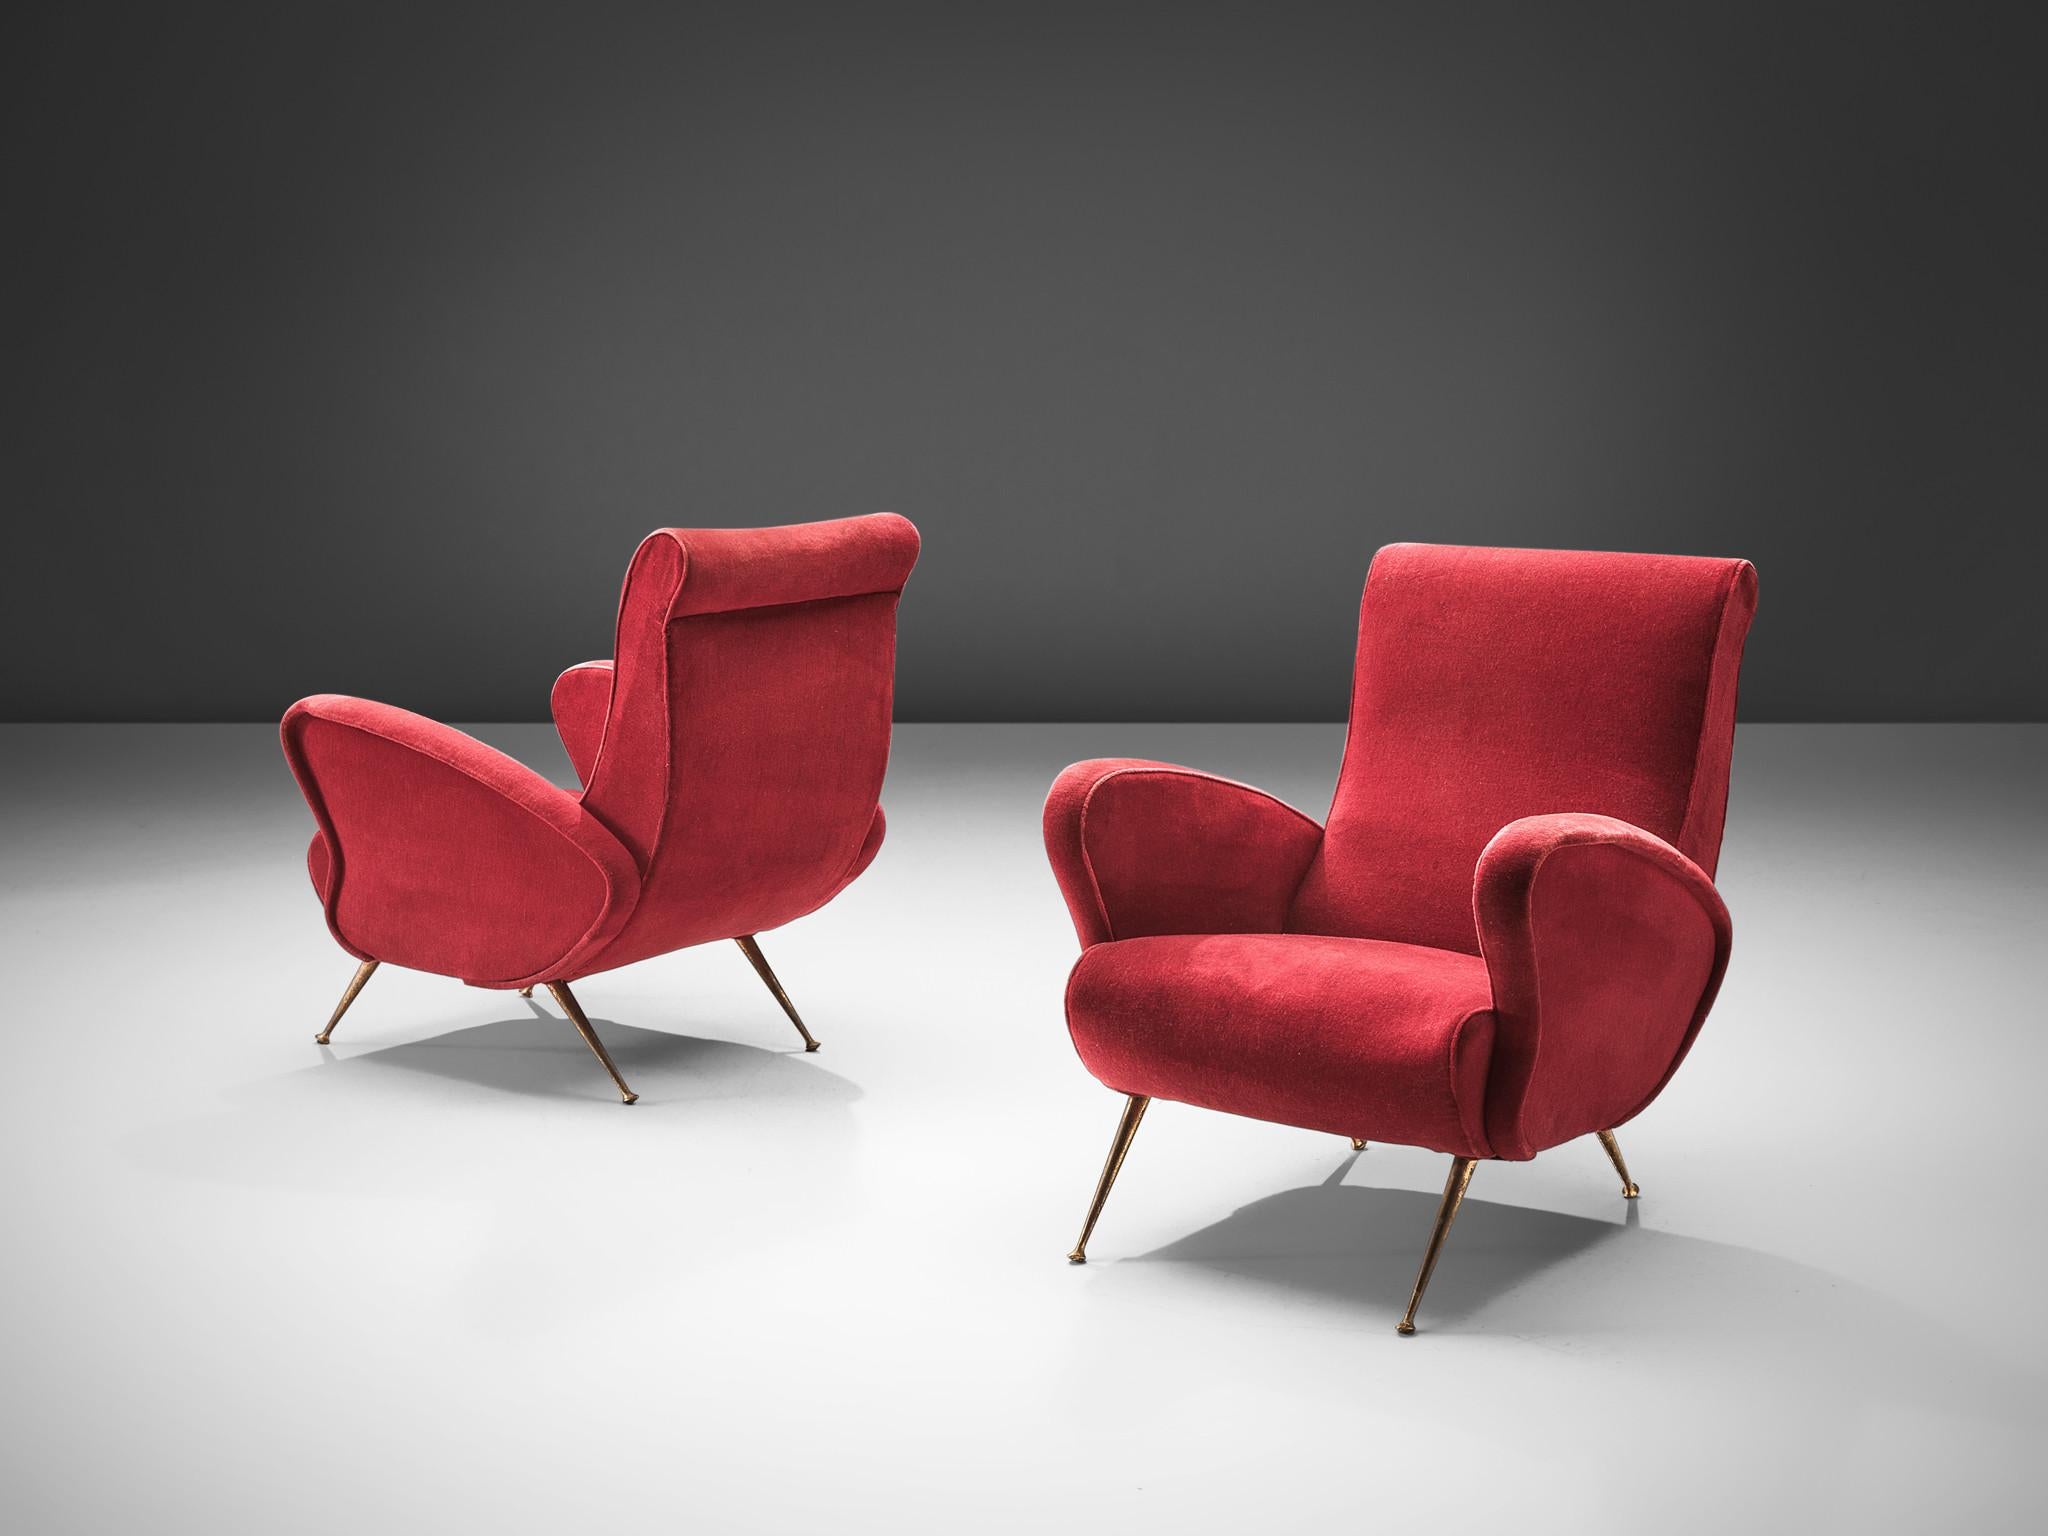 Lounge set, red velvet, brass, Italy, 1950s.

This set is an iconic example of Italian design from the fifties. Organic and sculptural, the two matching lounge chairs is anything but minimalistic. Equipped with the original stiletto brass feet